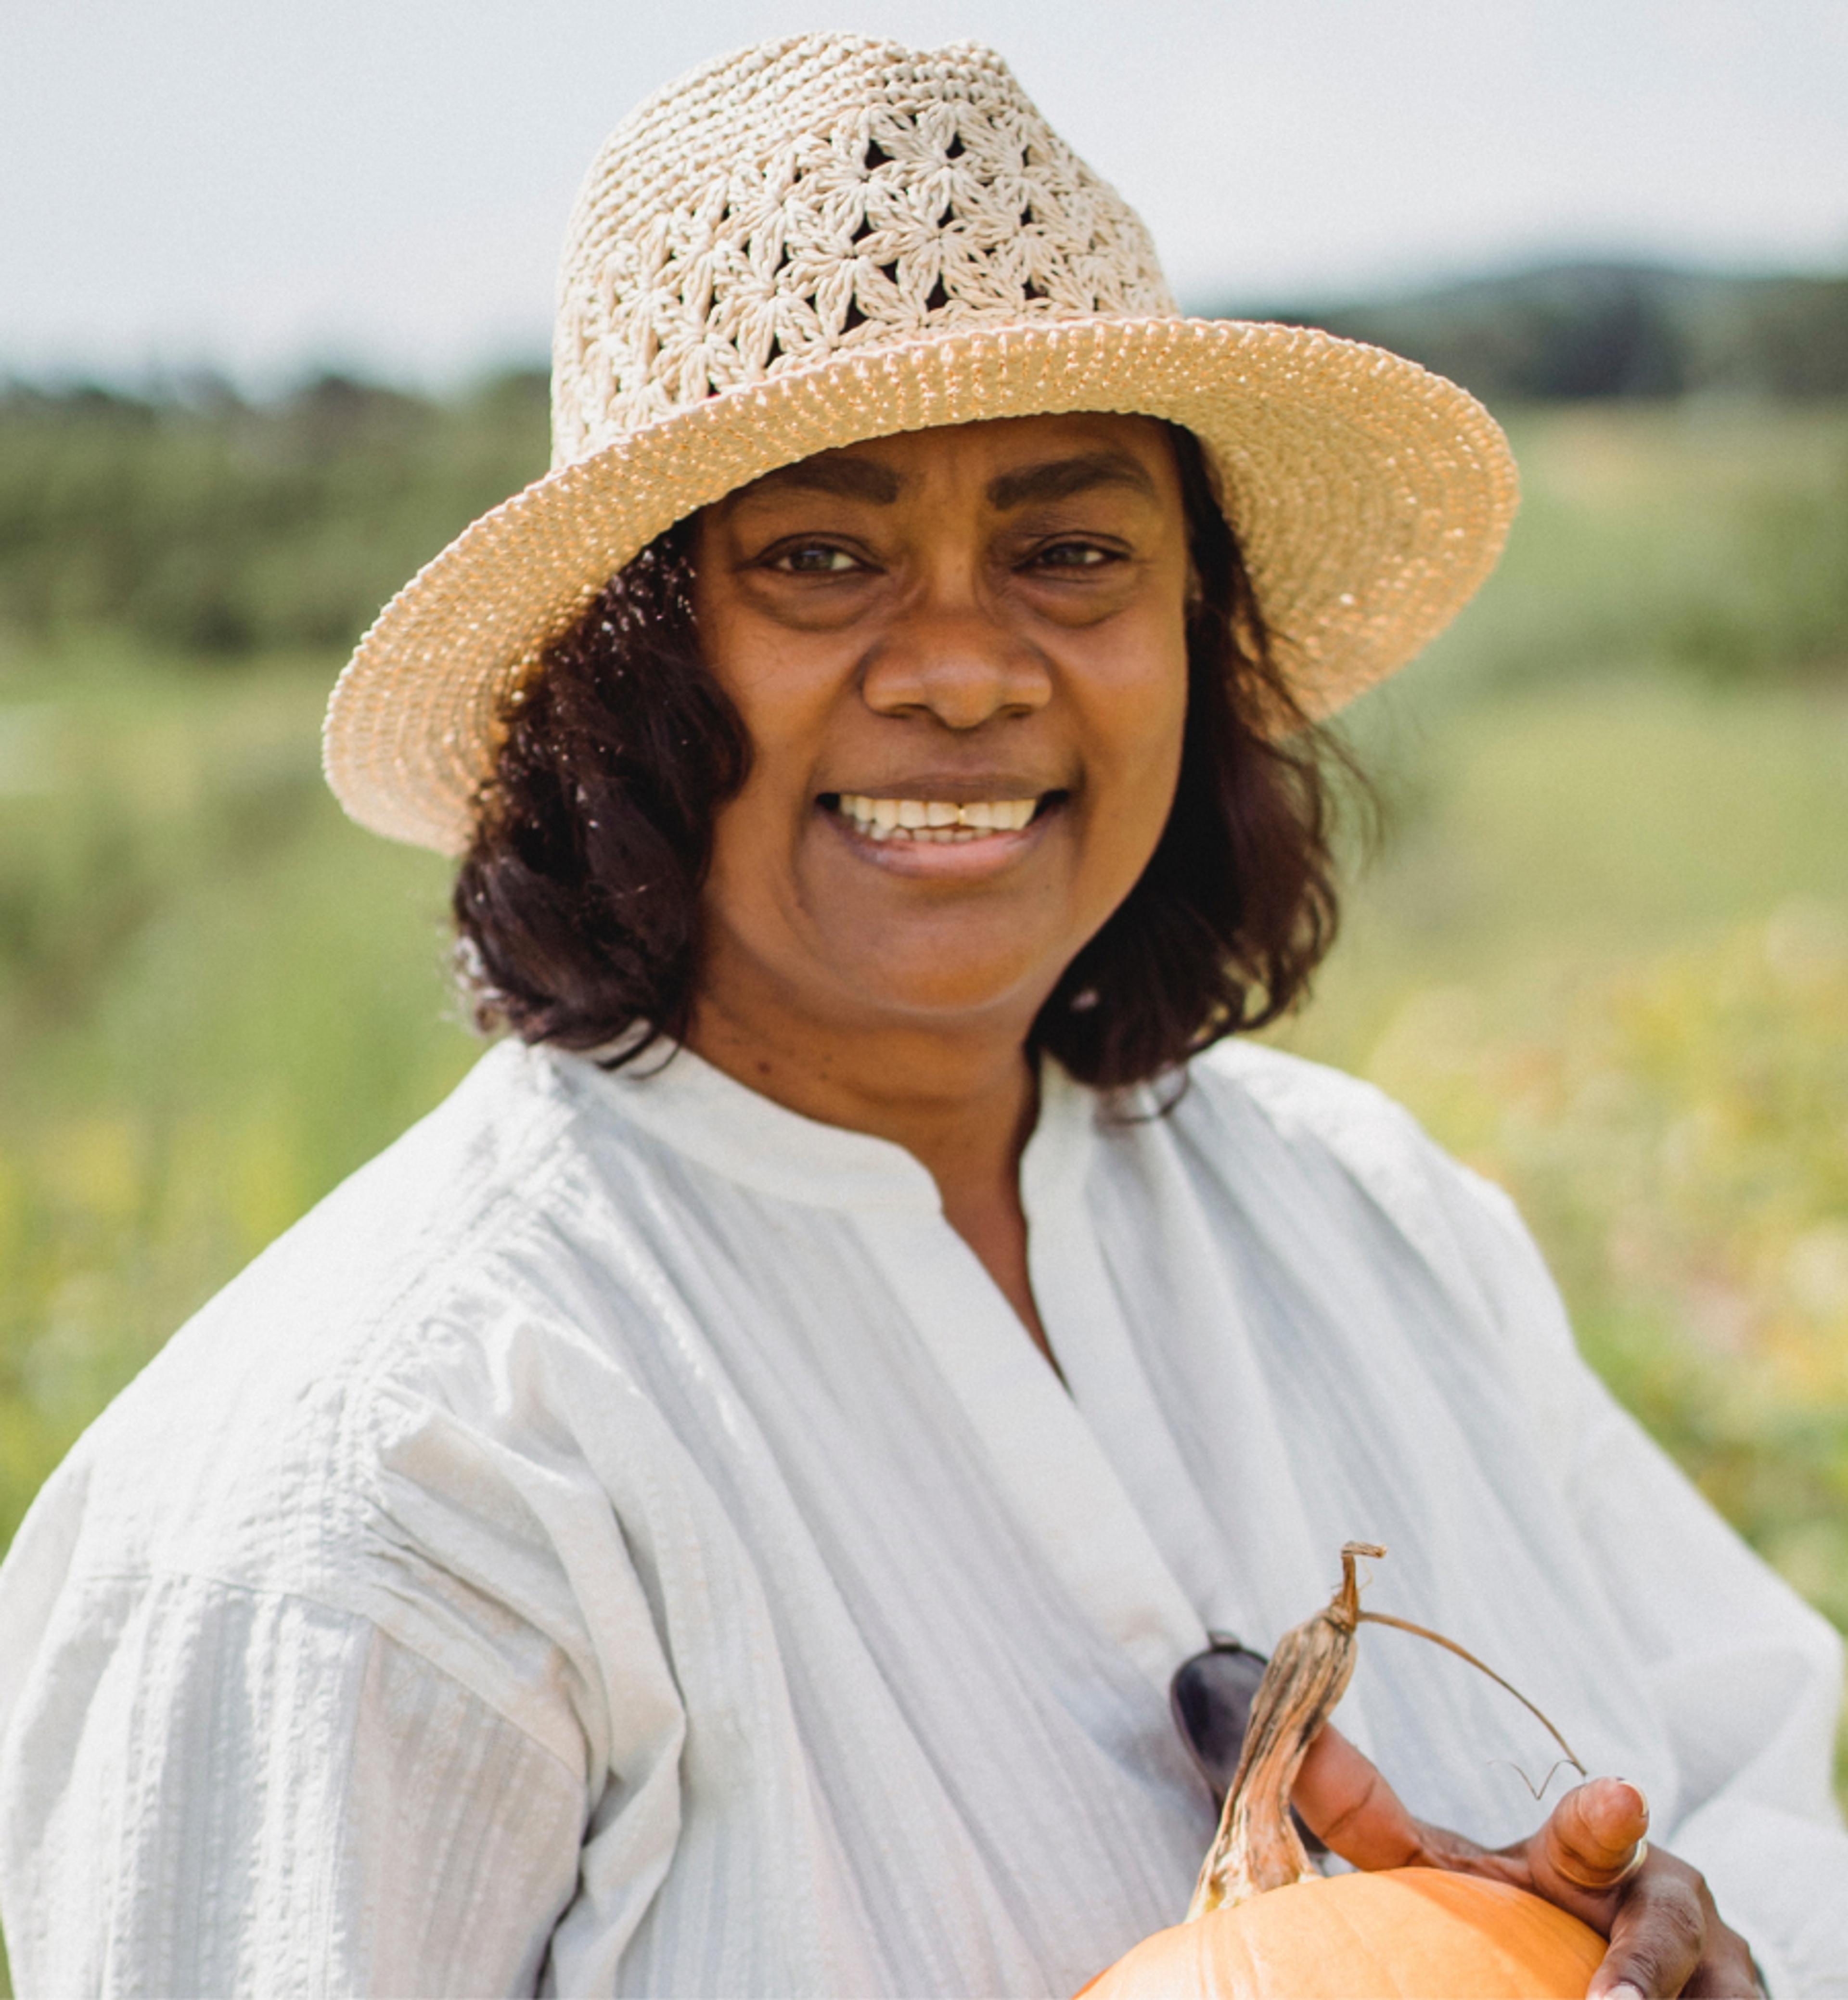 A smiling person with a hat in a field holding a pumpkin.